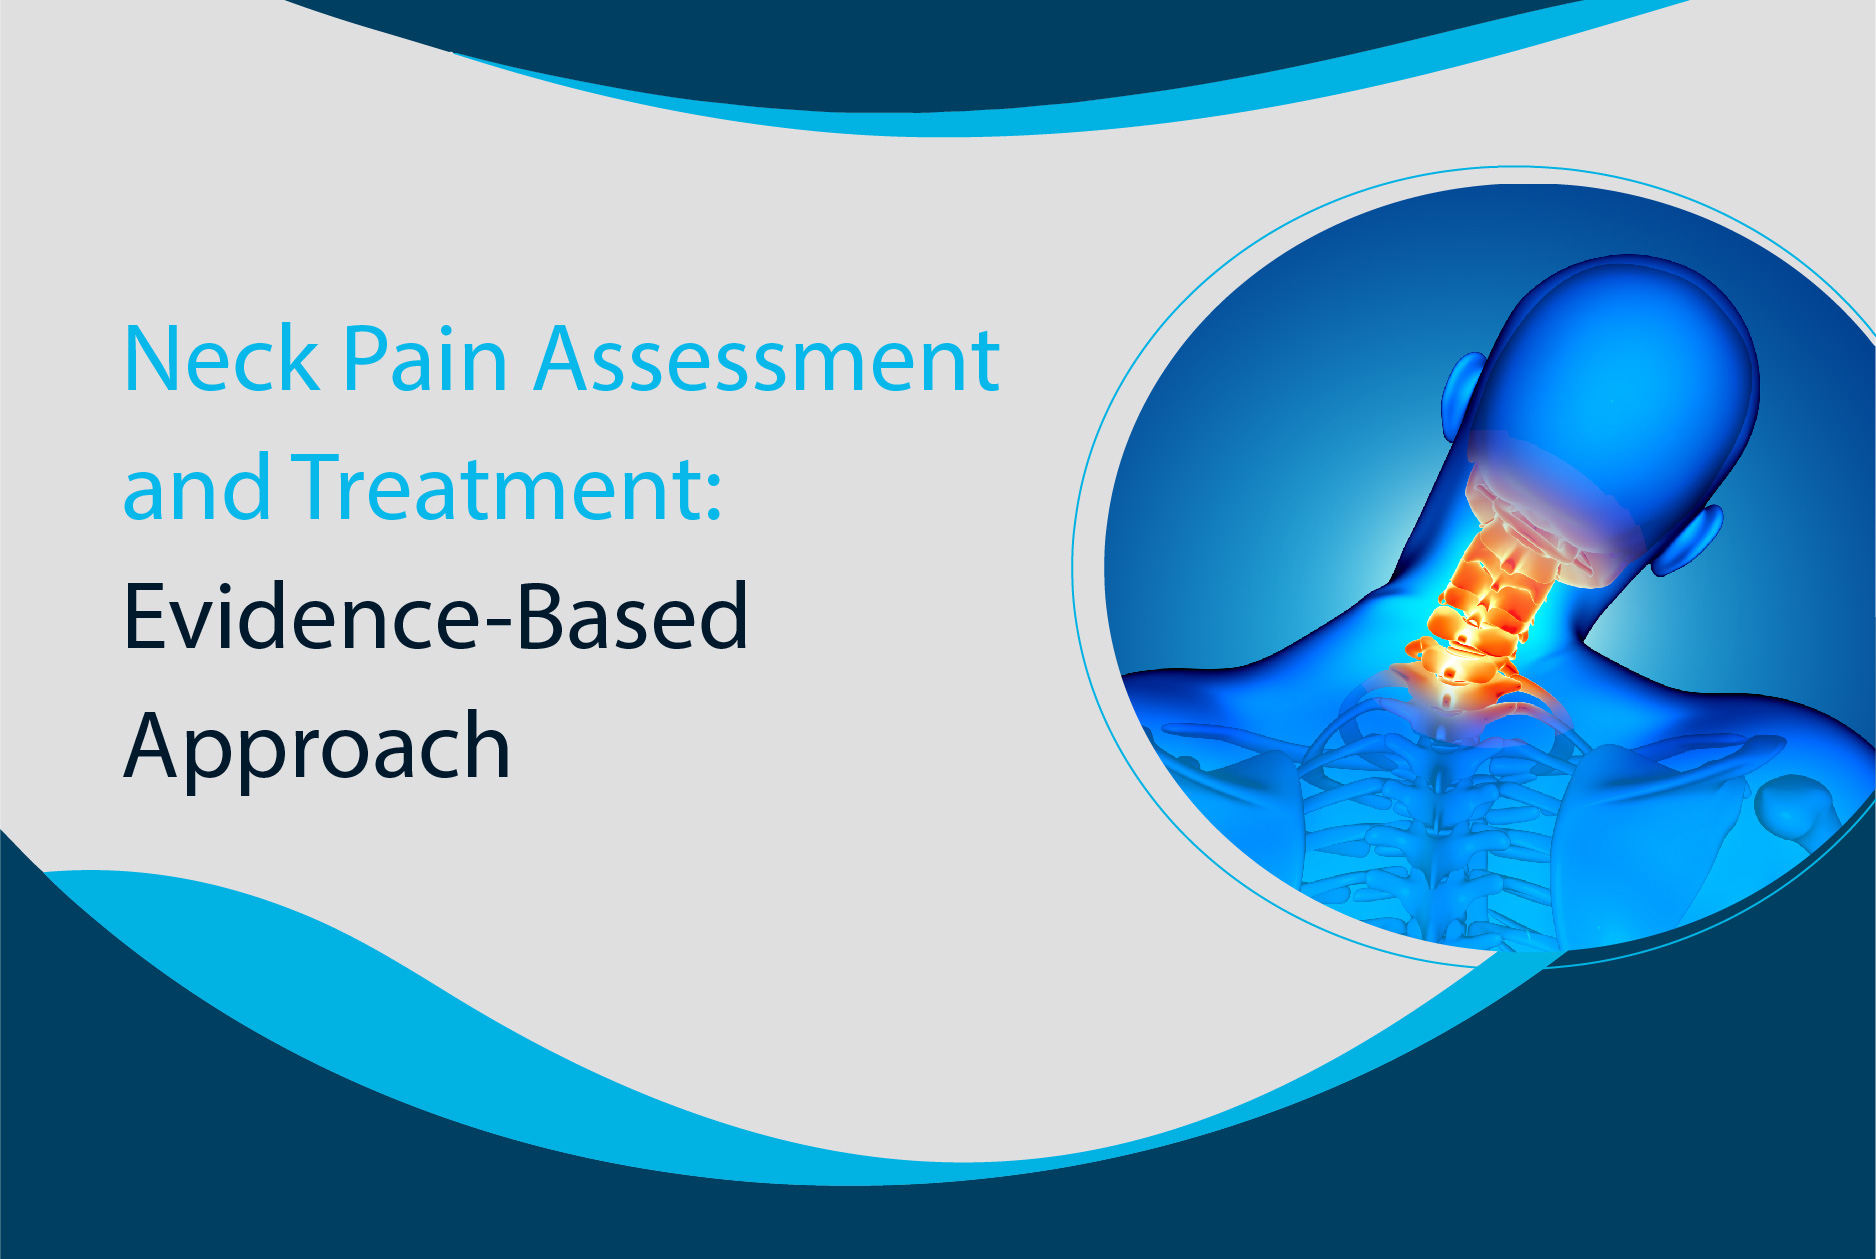 Neck Pain Assessment and Treatment